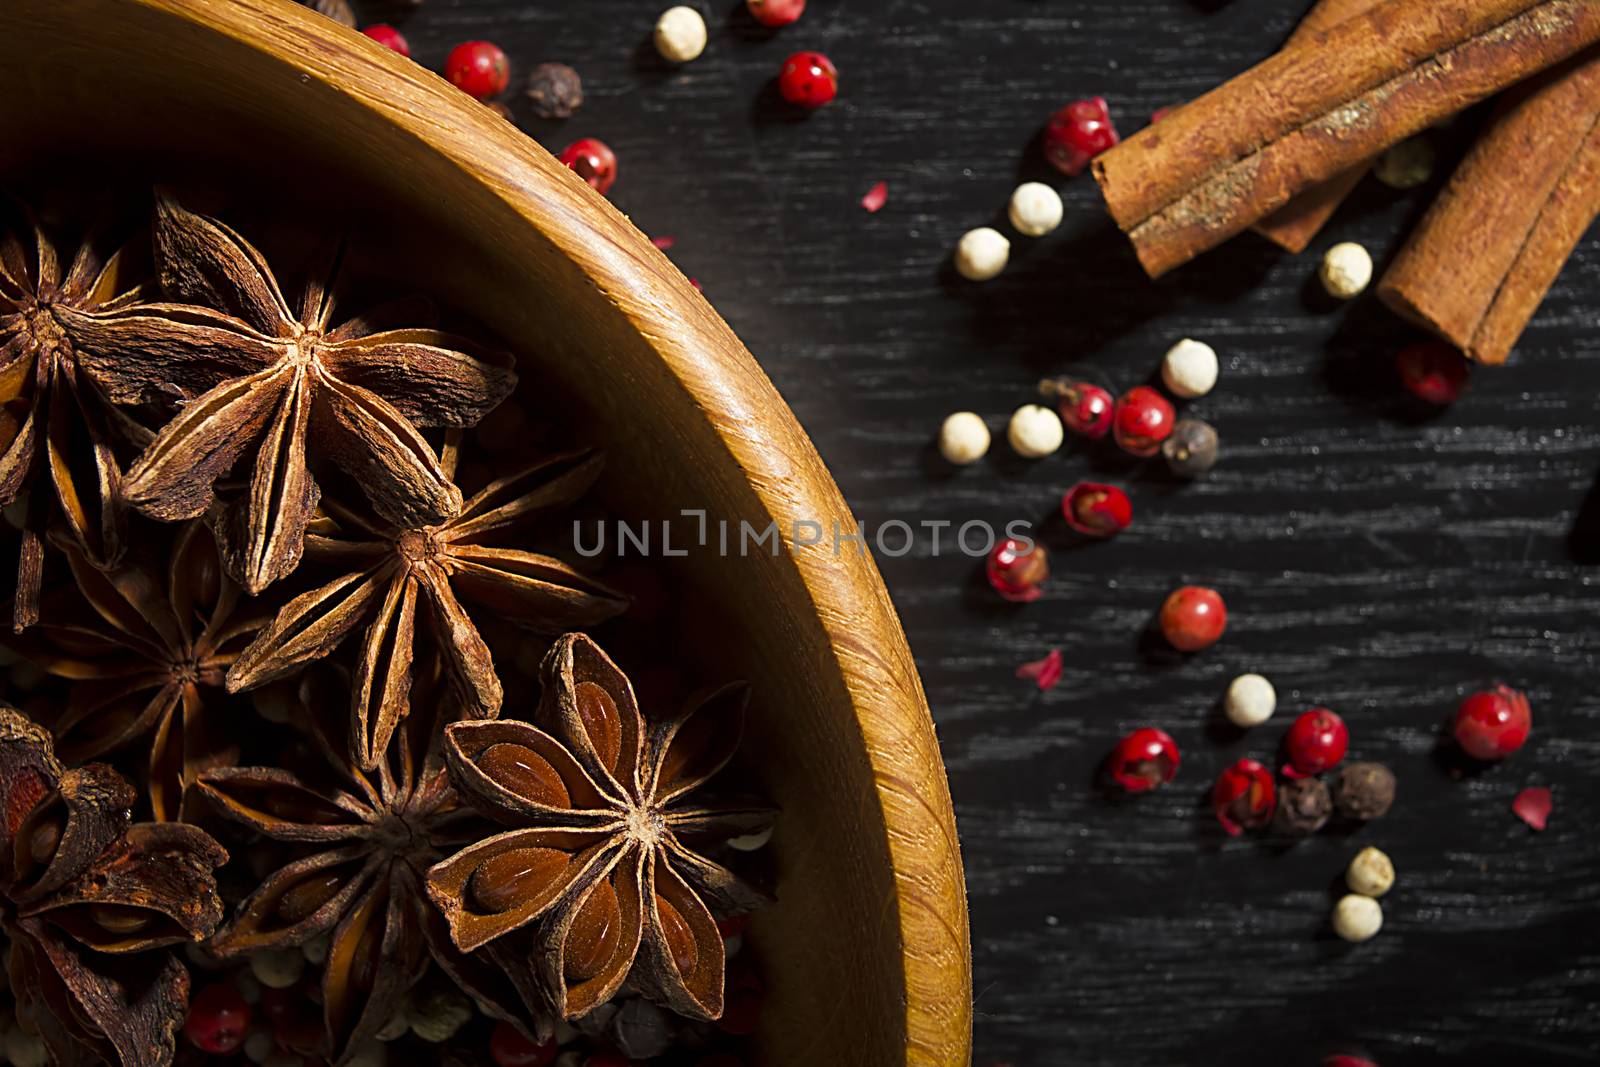 Anise stars and peppercorns by VIPDesignUSA